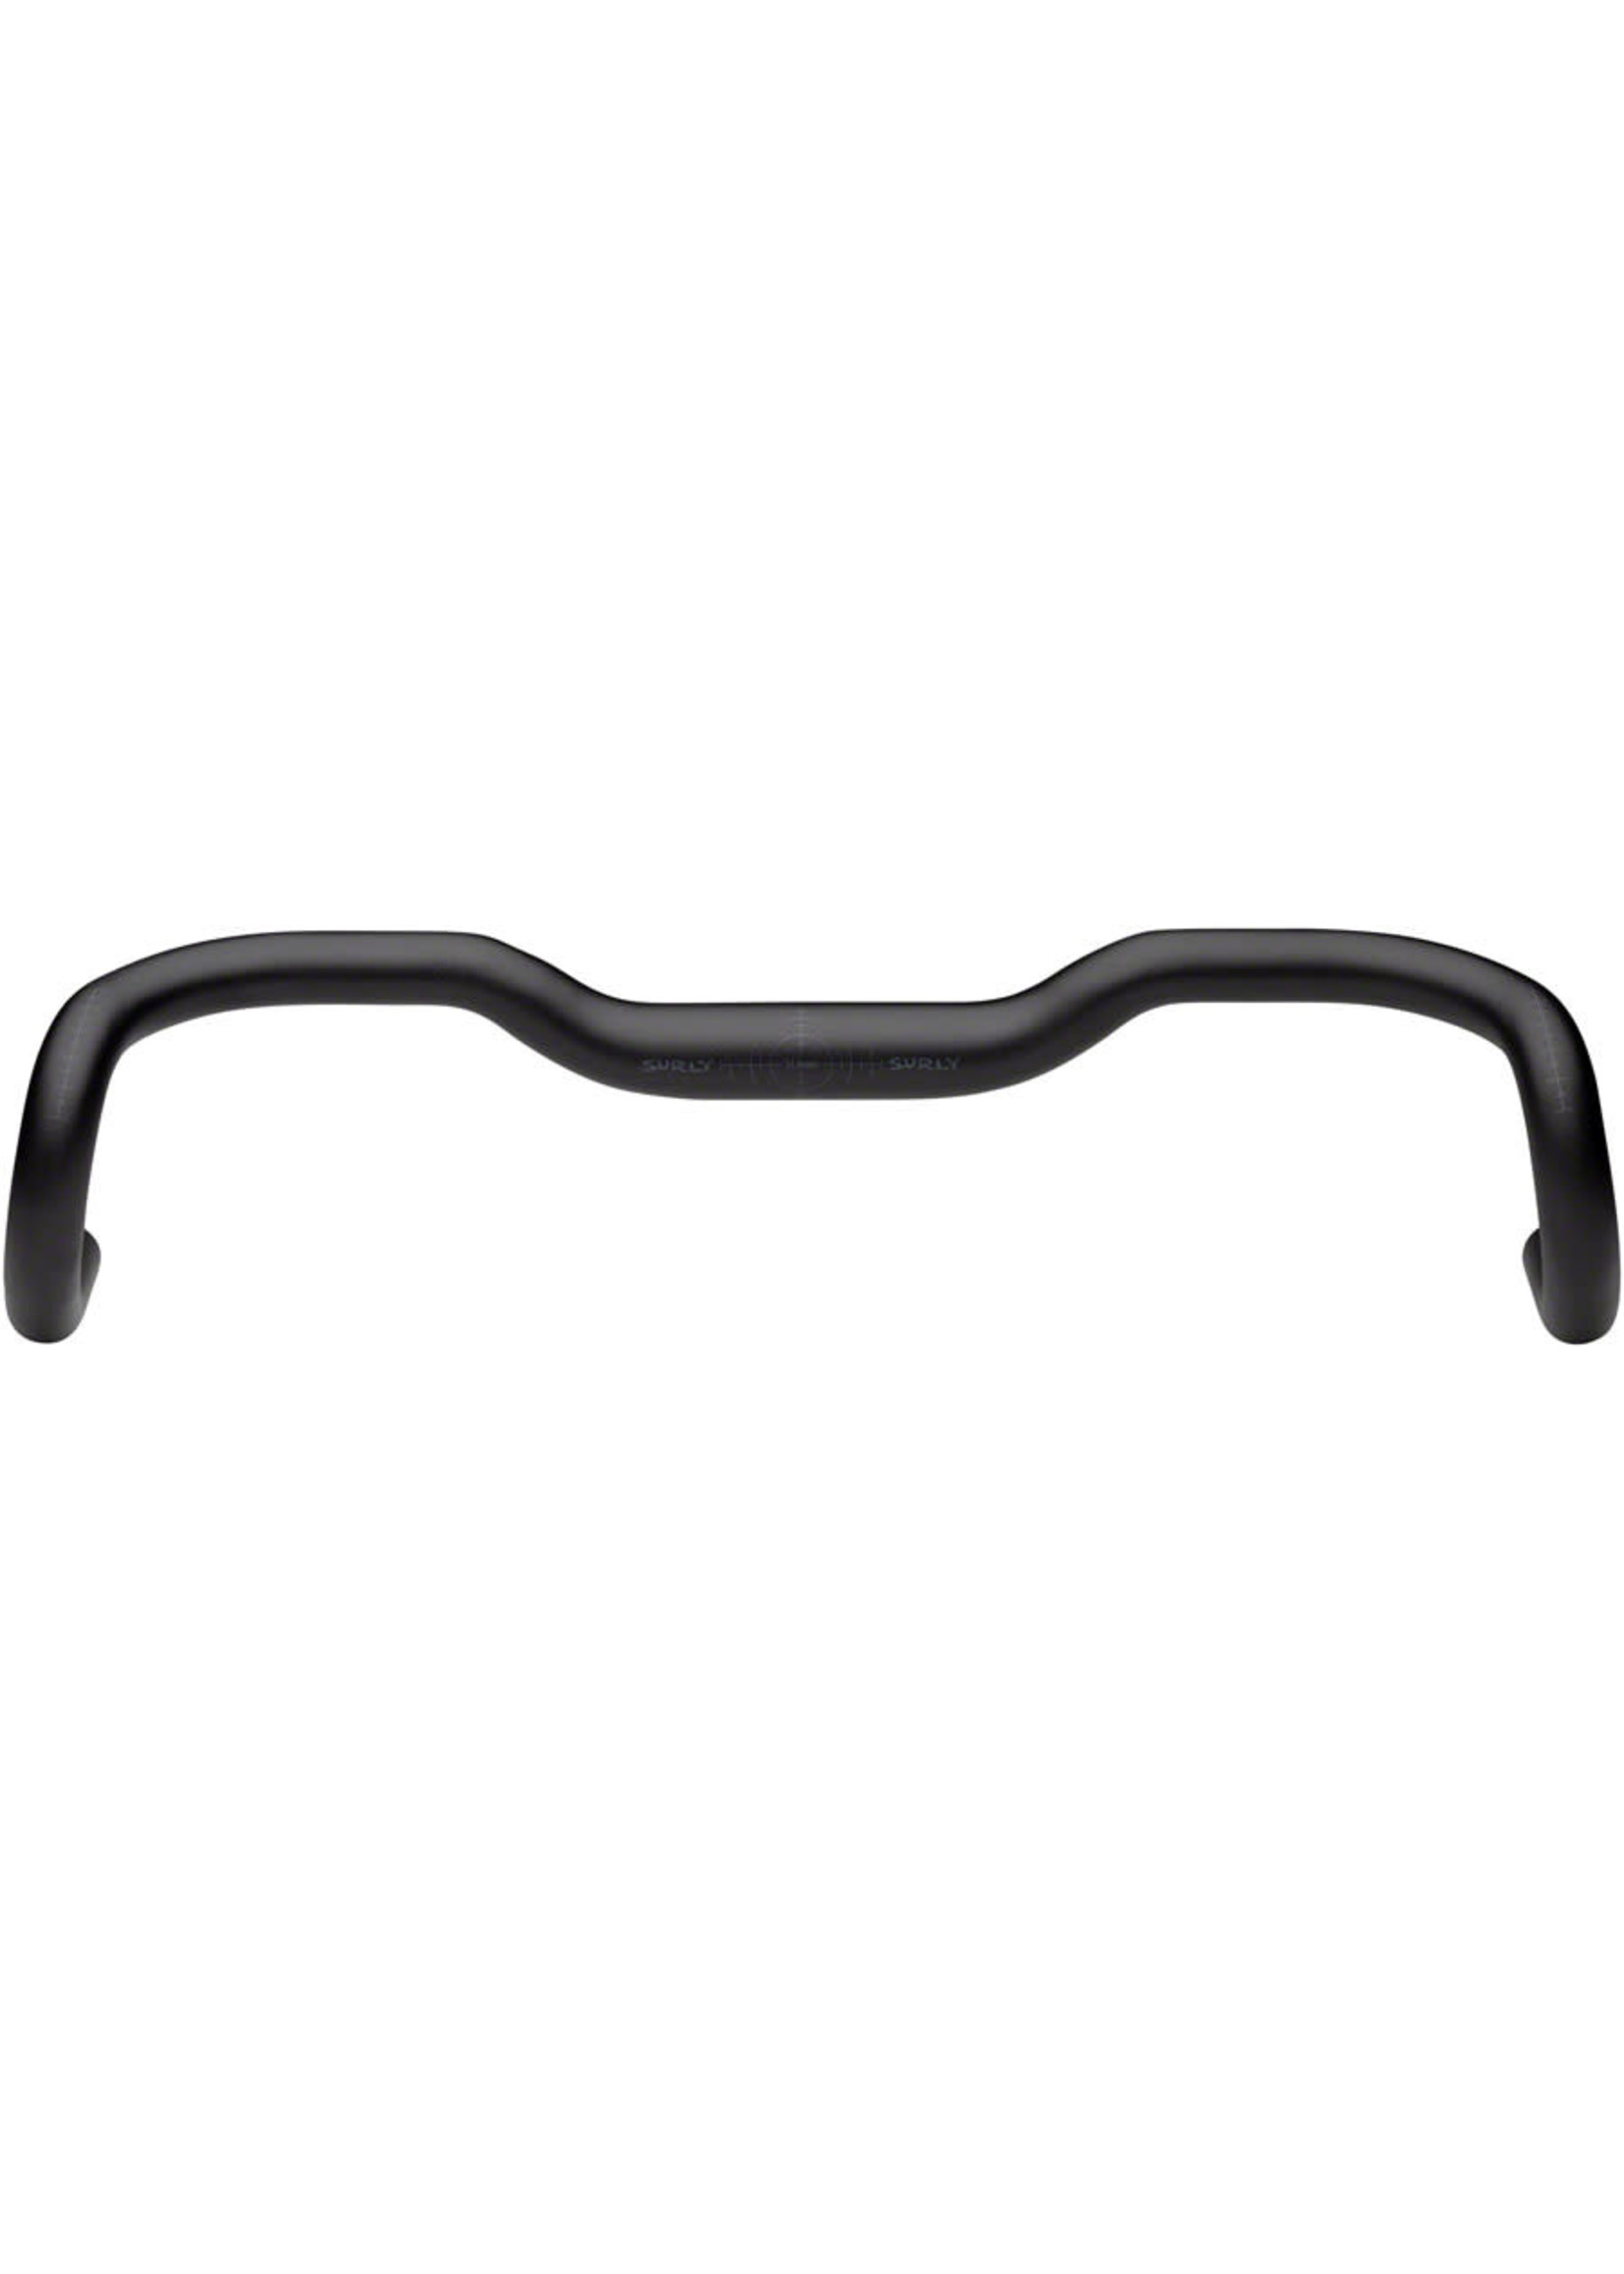 Surly Guidon Surly Truck Stop Bar, 45 cm